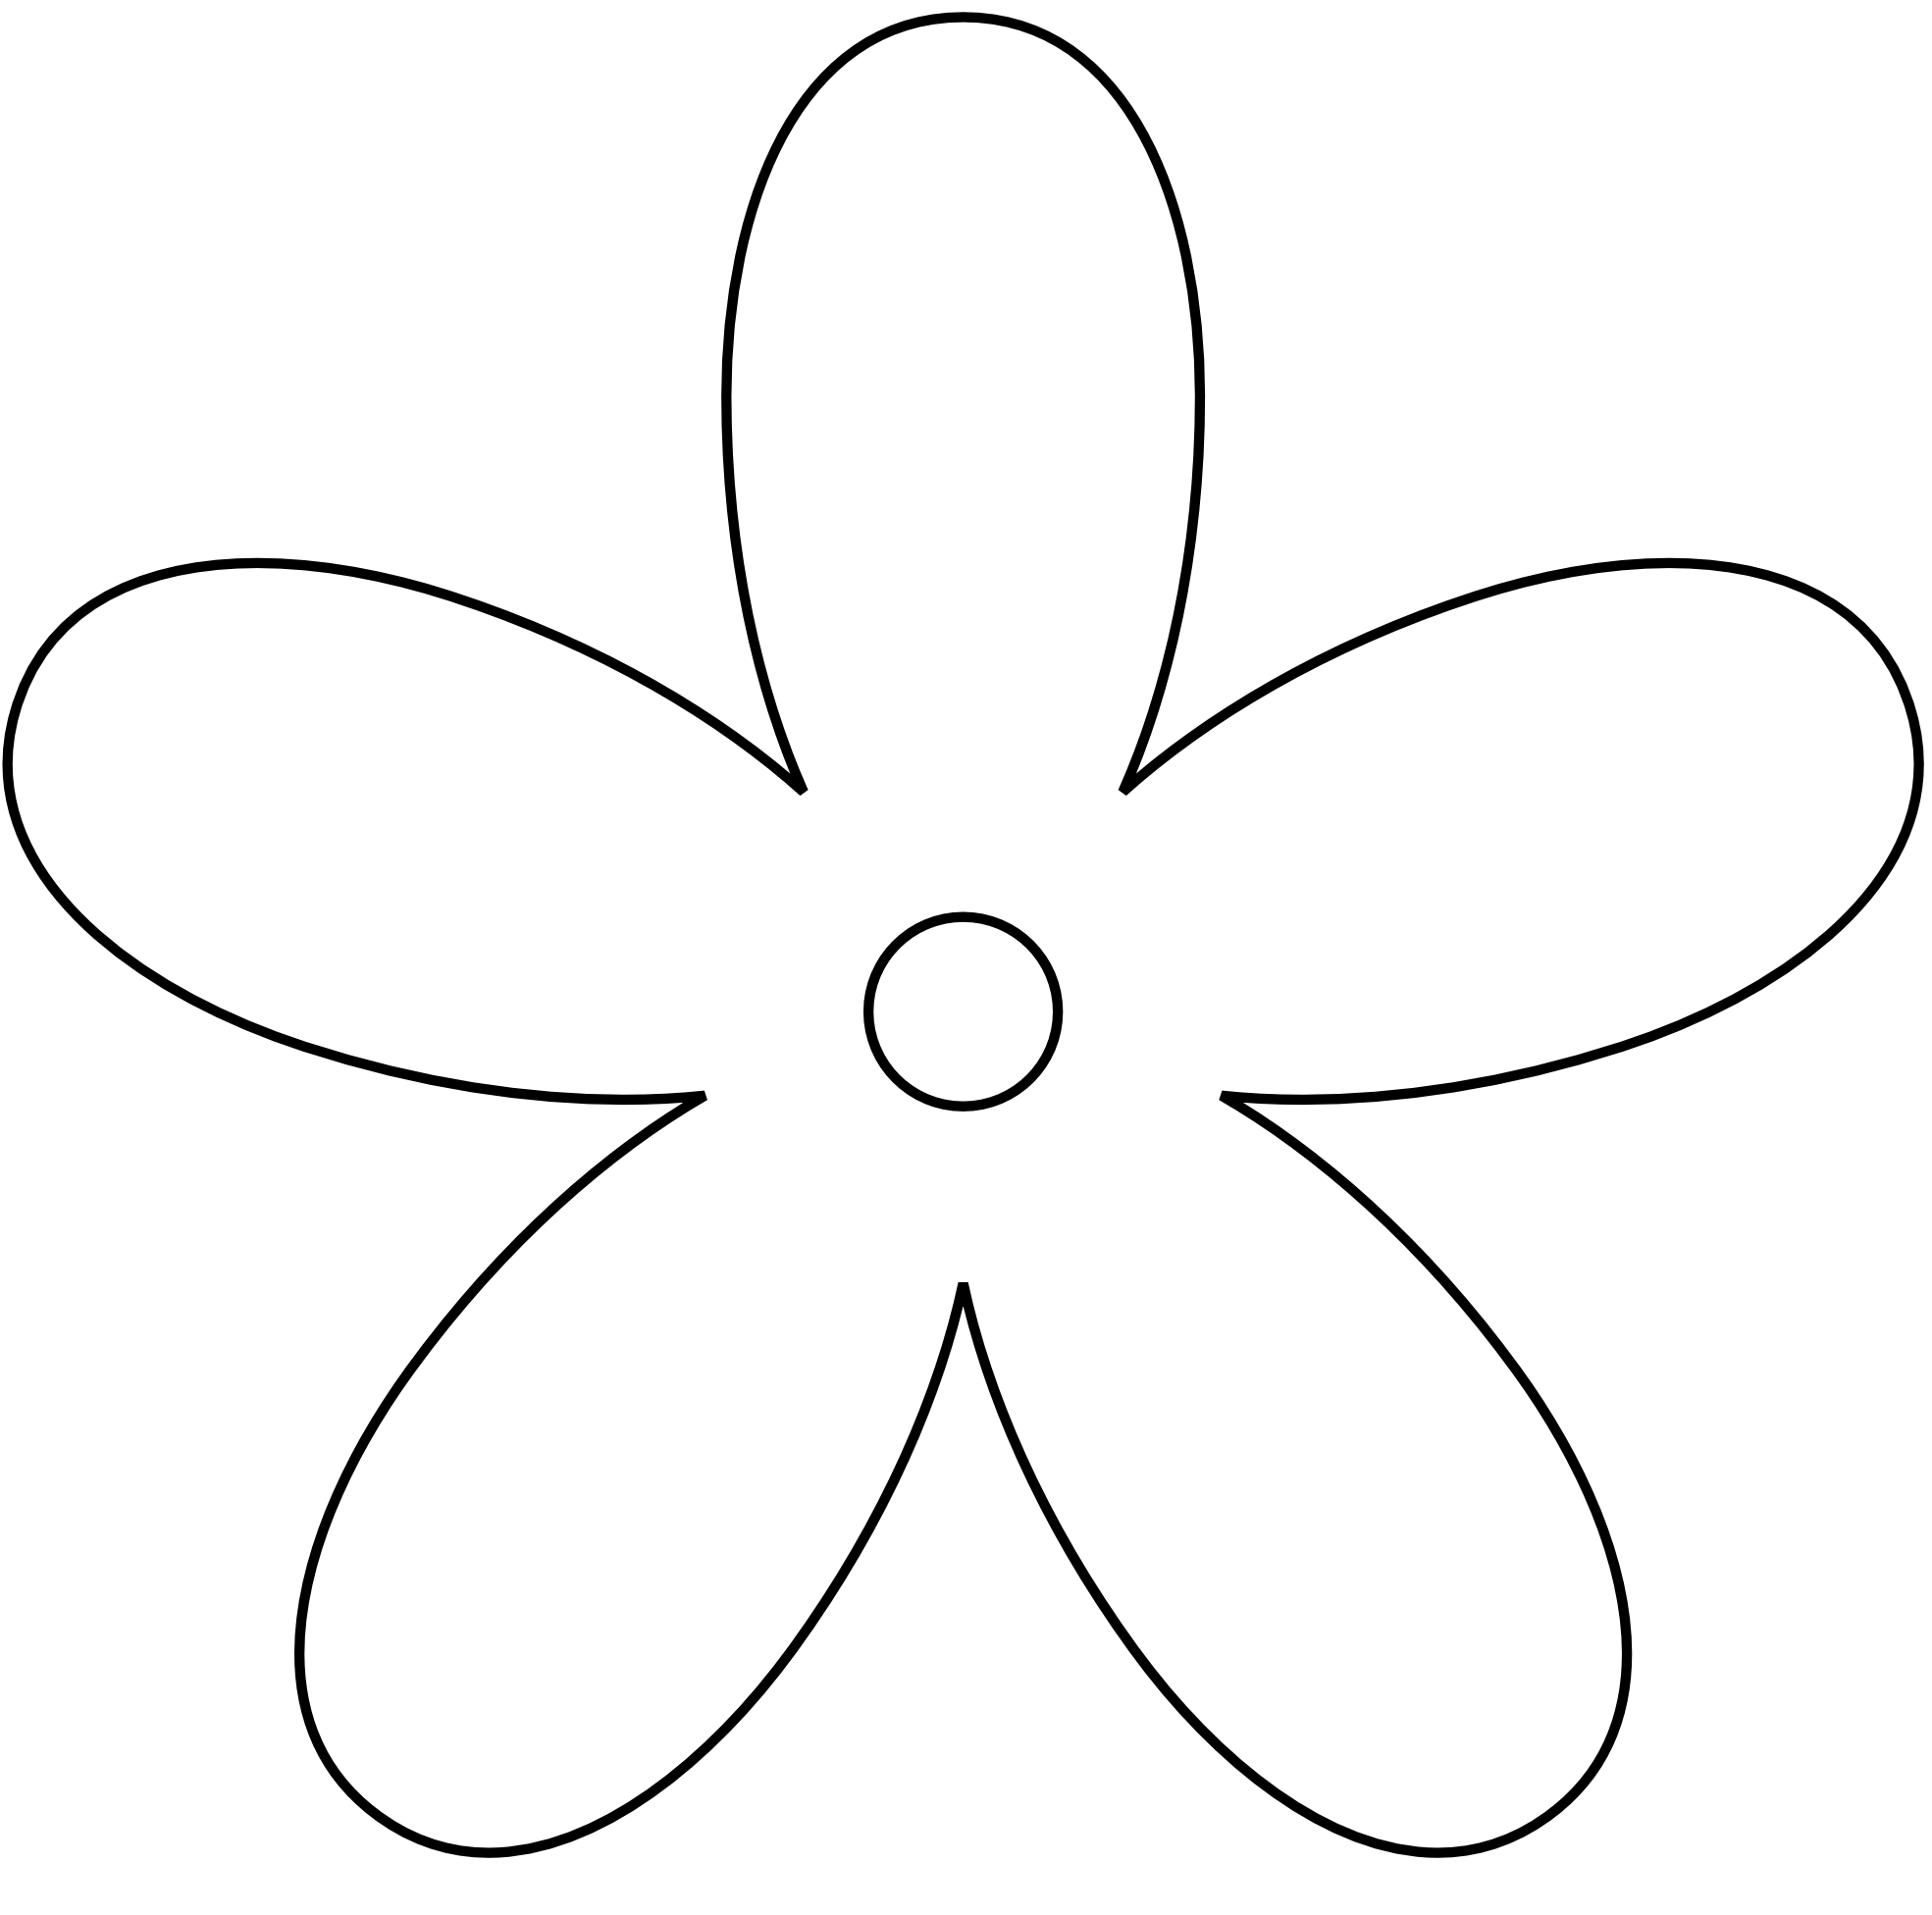 Simple Flower Clipart Black And White | Clipart Panda - Free ...